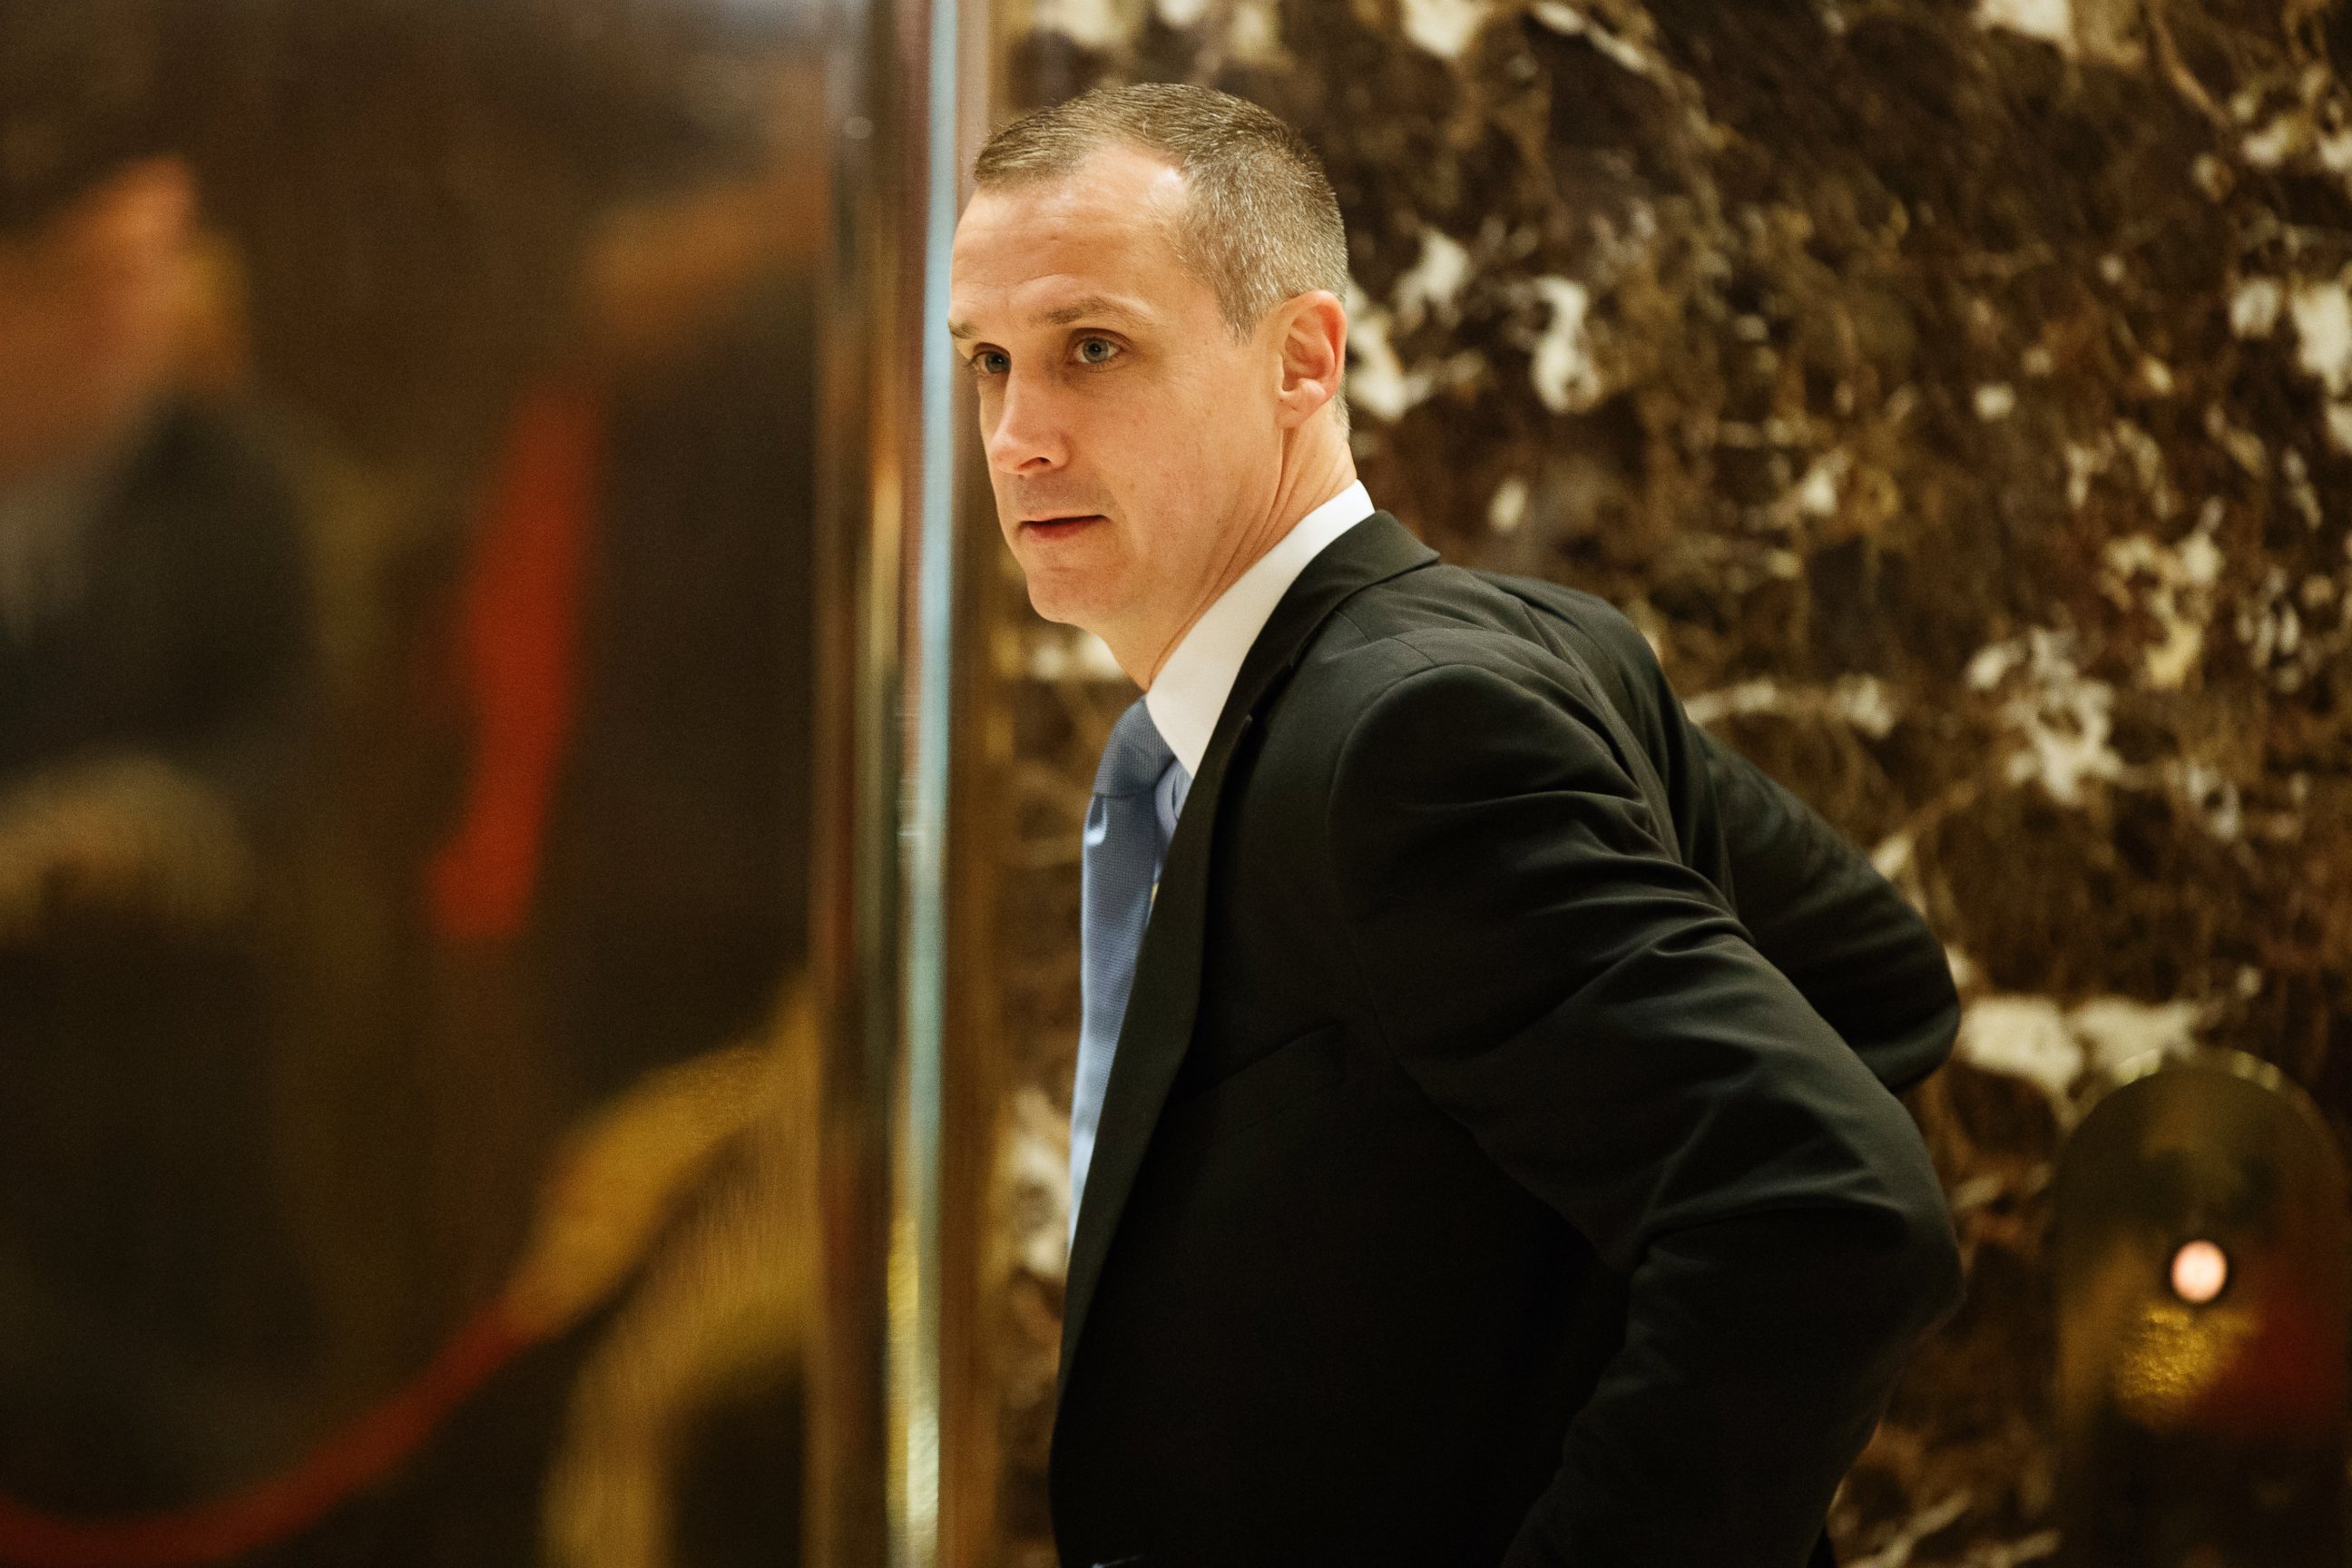 PHOTO: Corey Lewandowski, former campaign manager for President-elect Donald Trump, talks with reporters as he arrives at Trump Tower in New York City, Nov. 29, 2016.